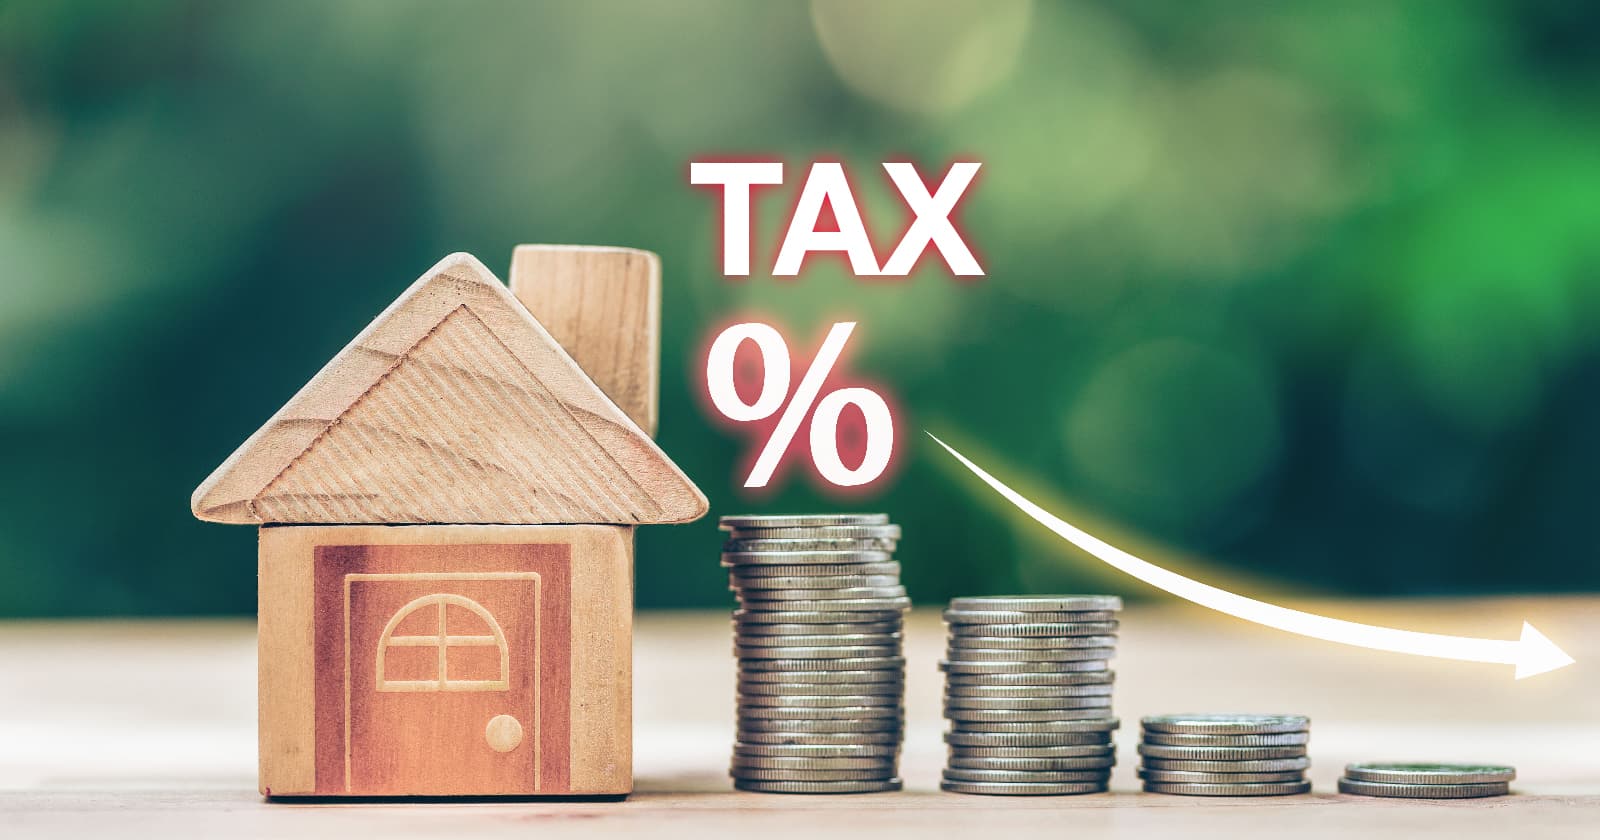 Tax Relief On Interest Paid On Housing Loans